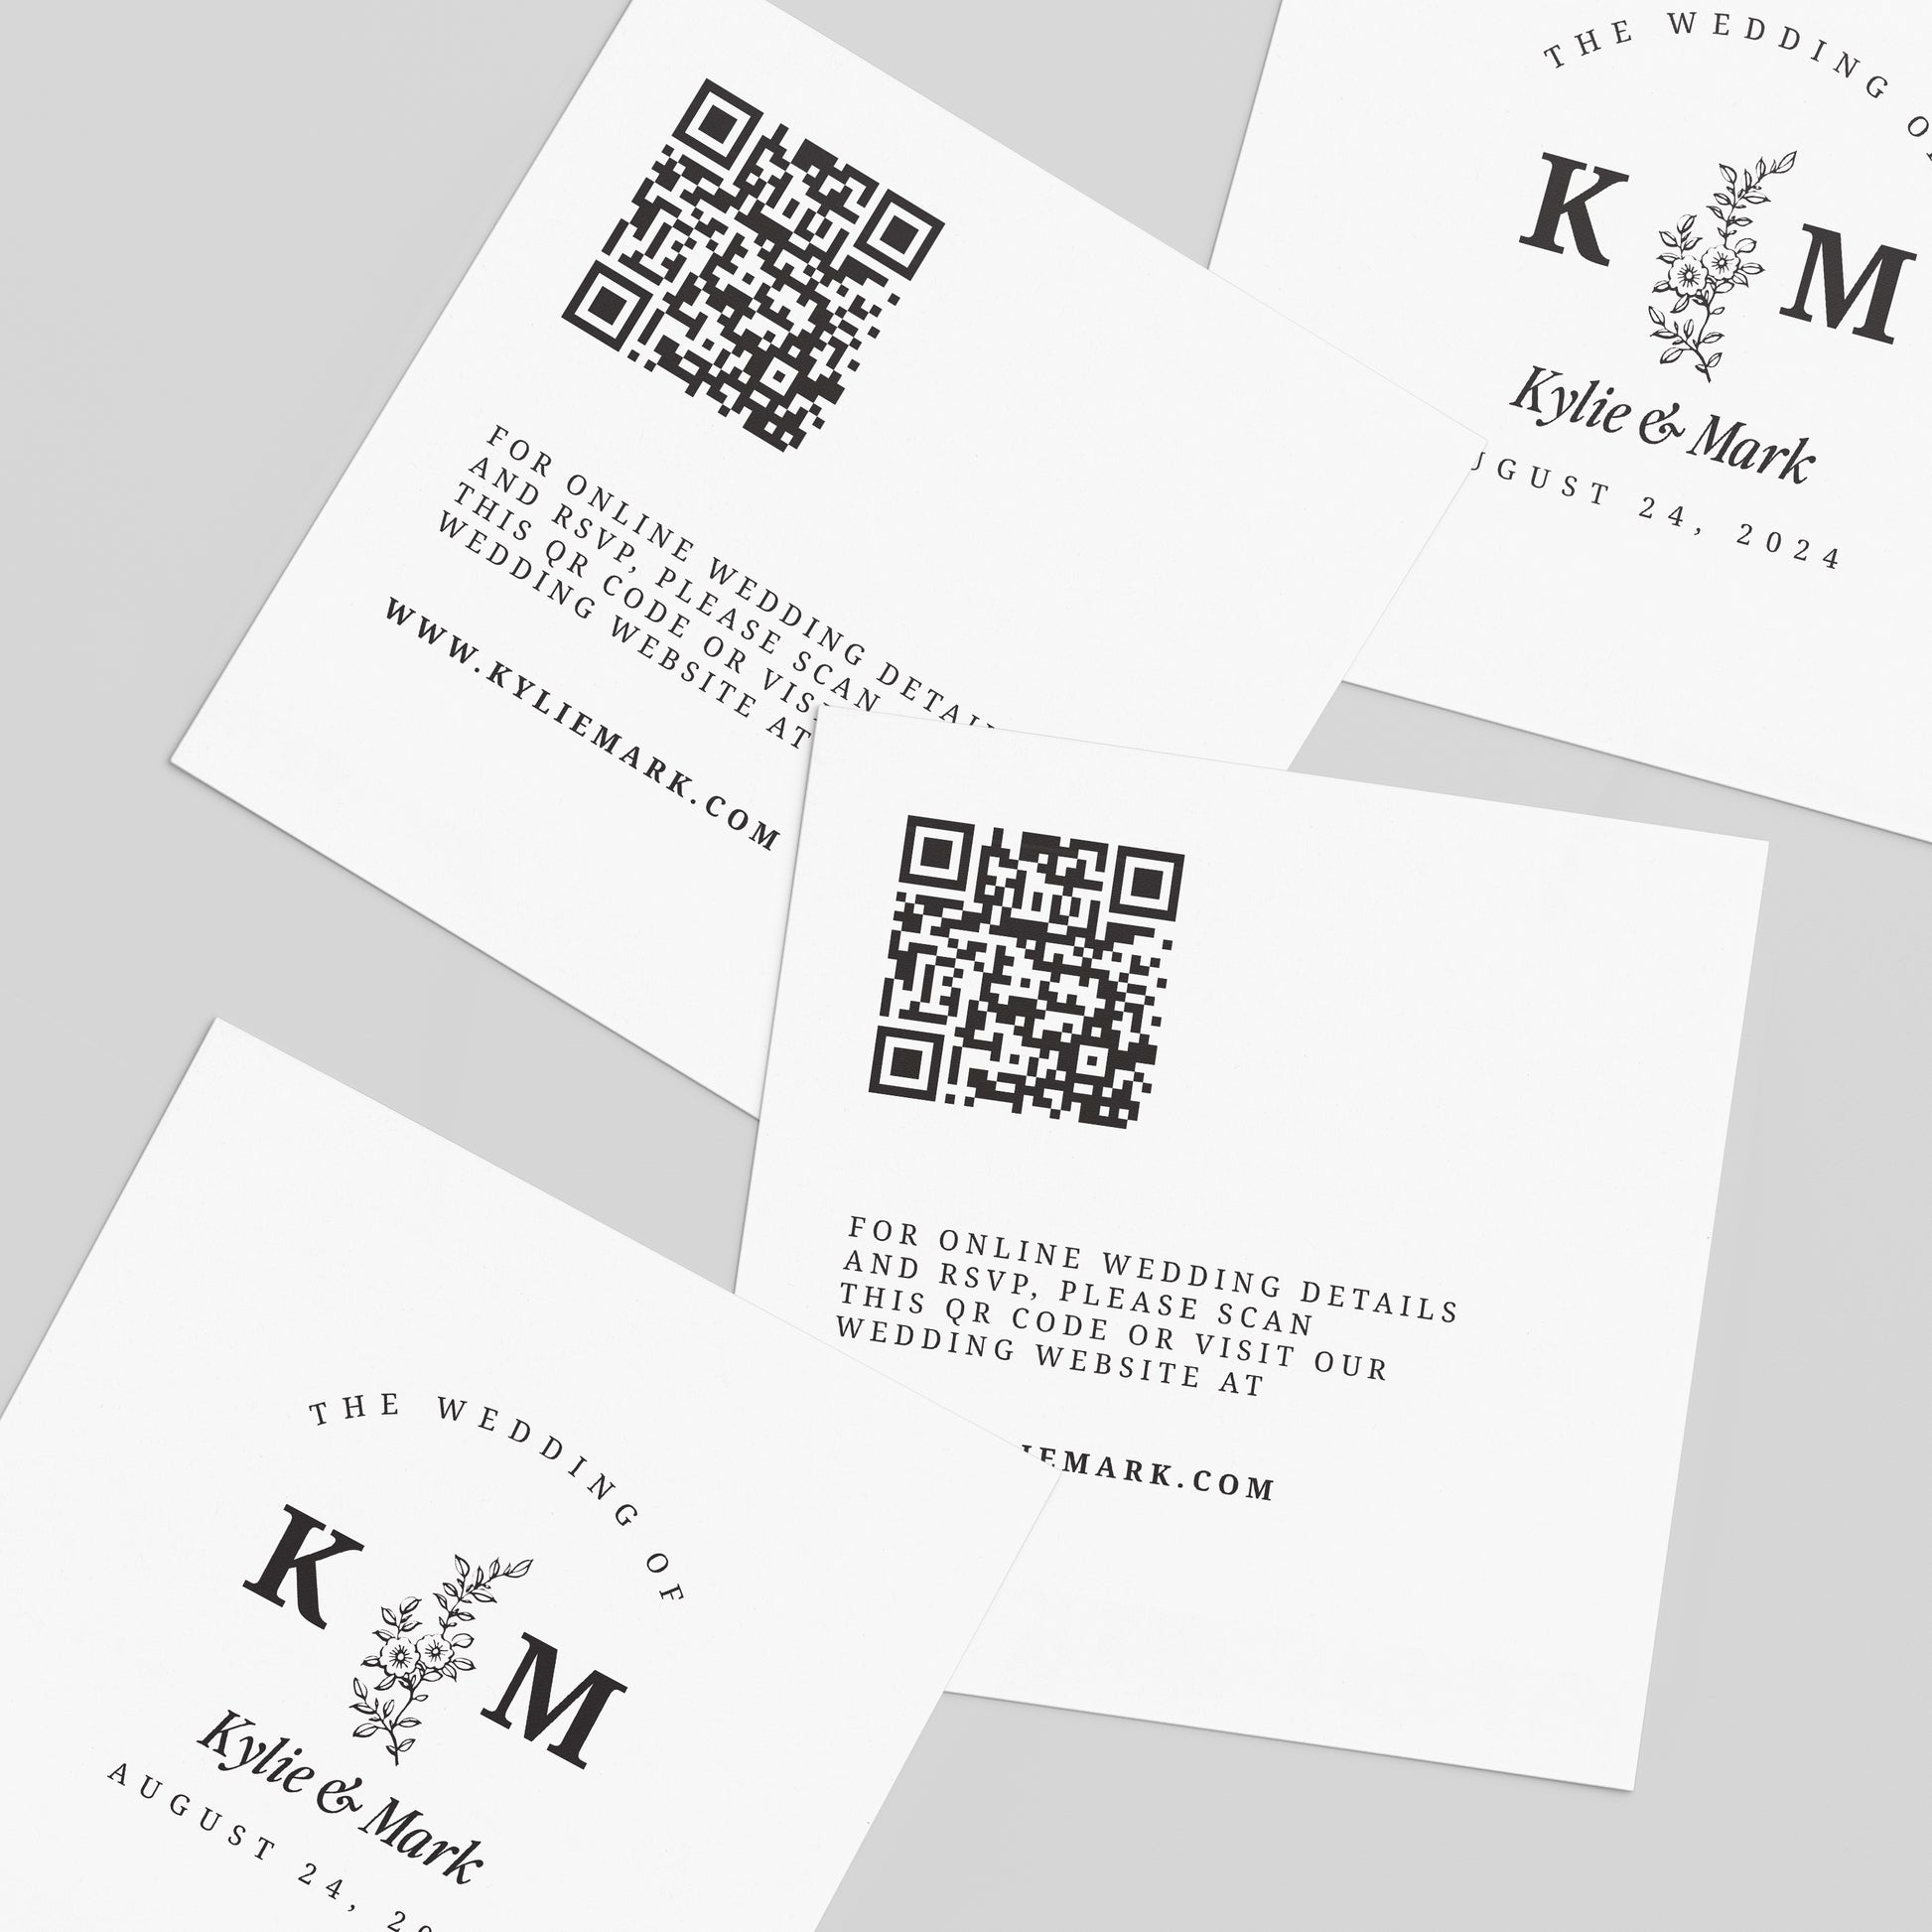 square wedding website cards with monograms, qr code and flowers - XOXOKristen